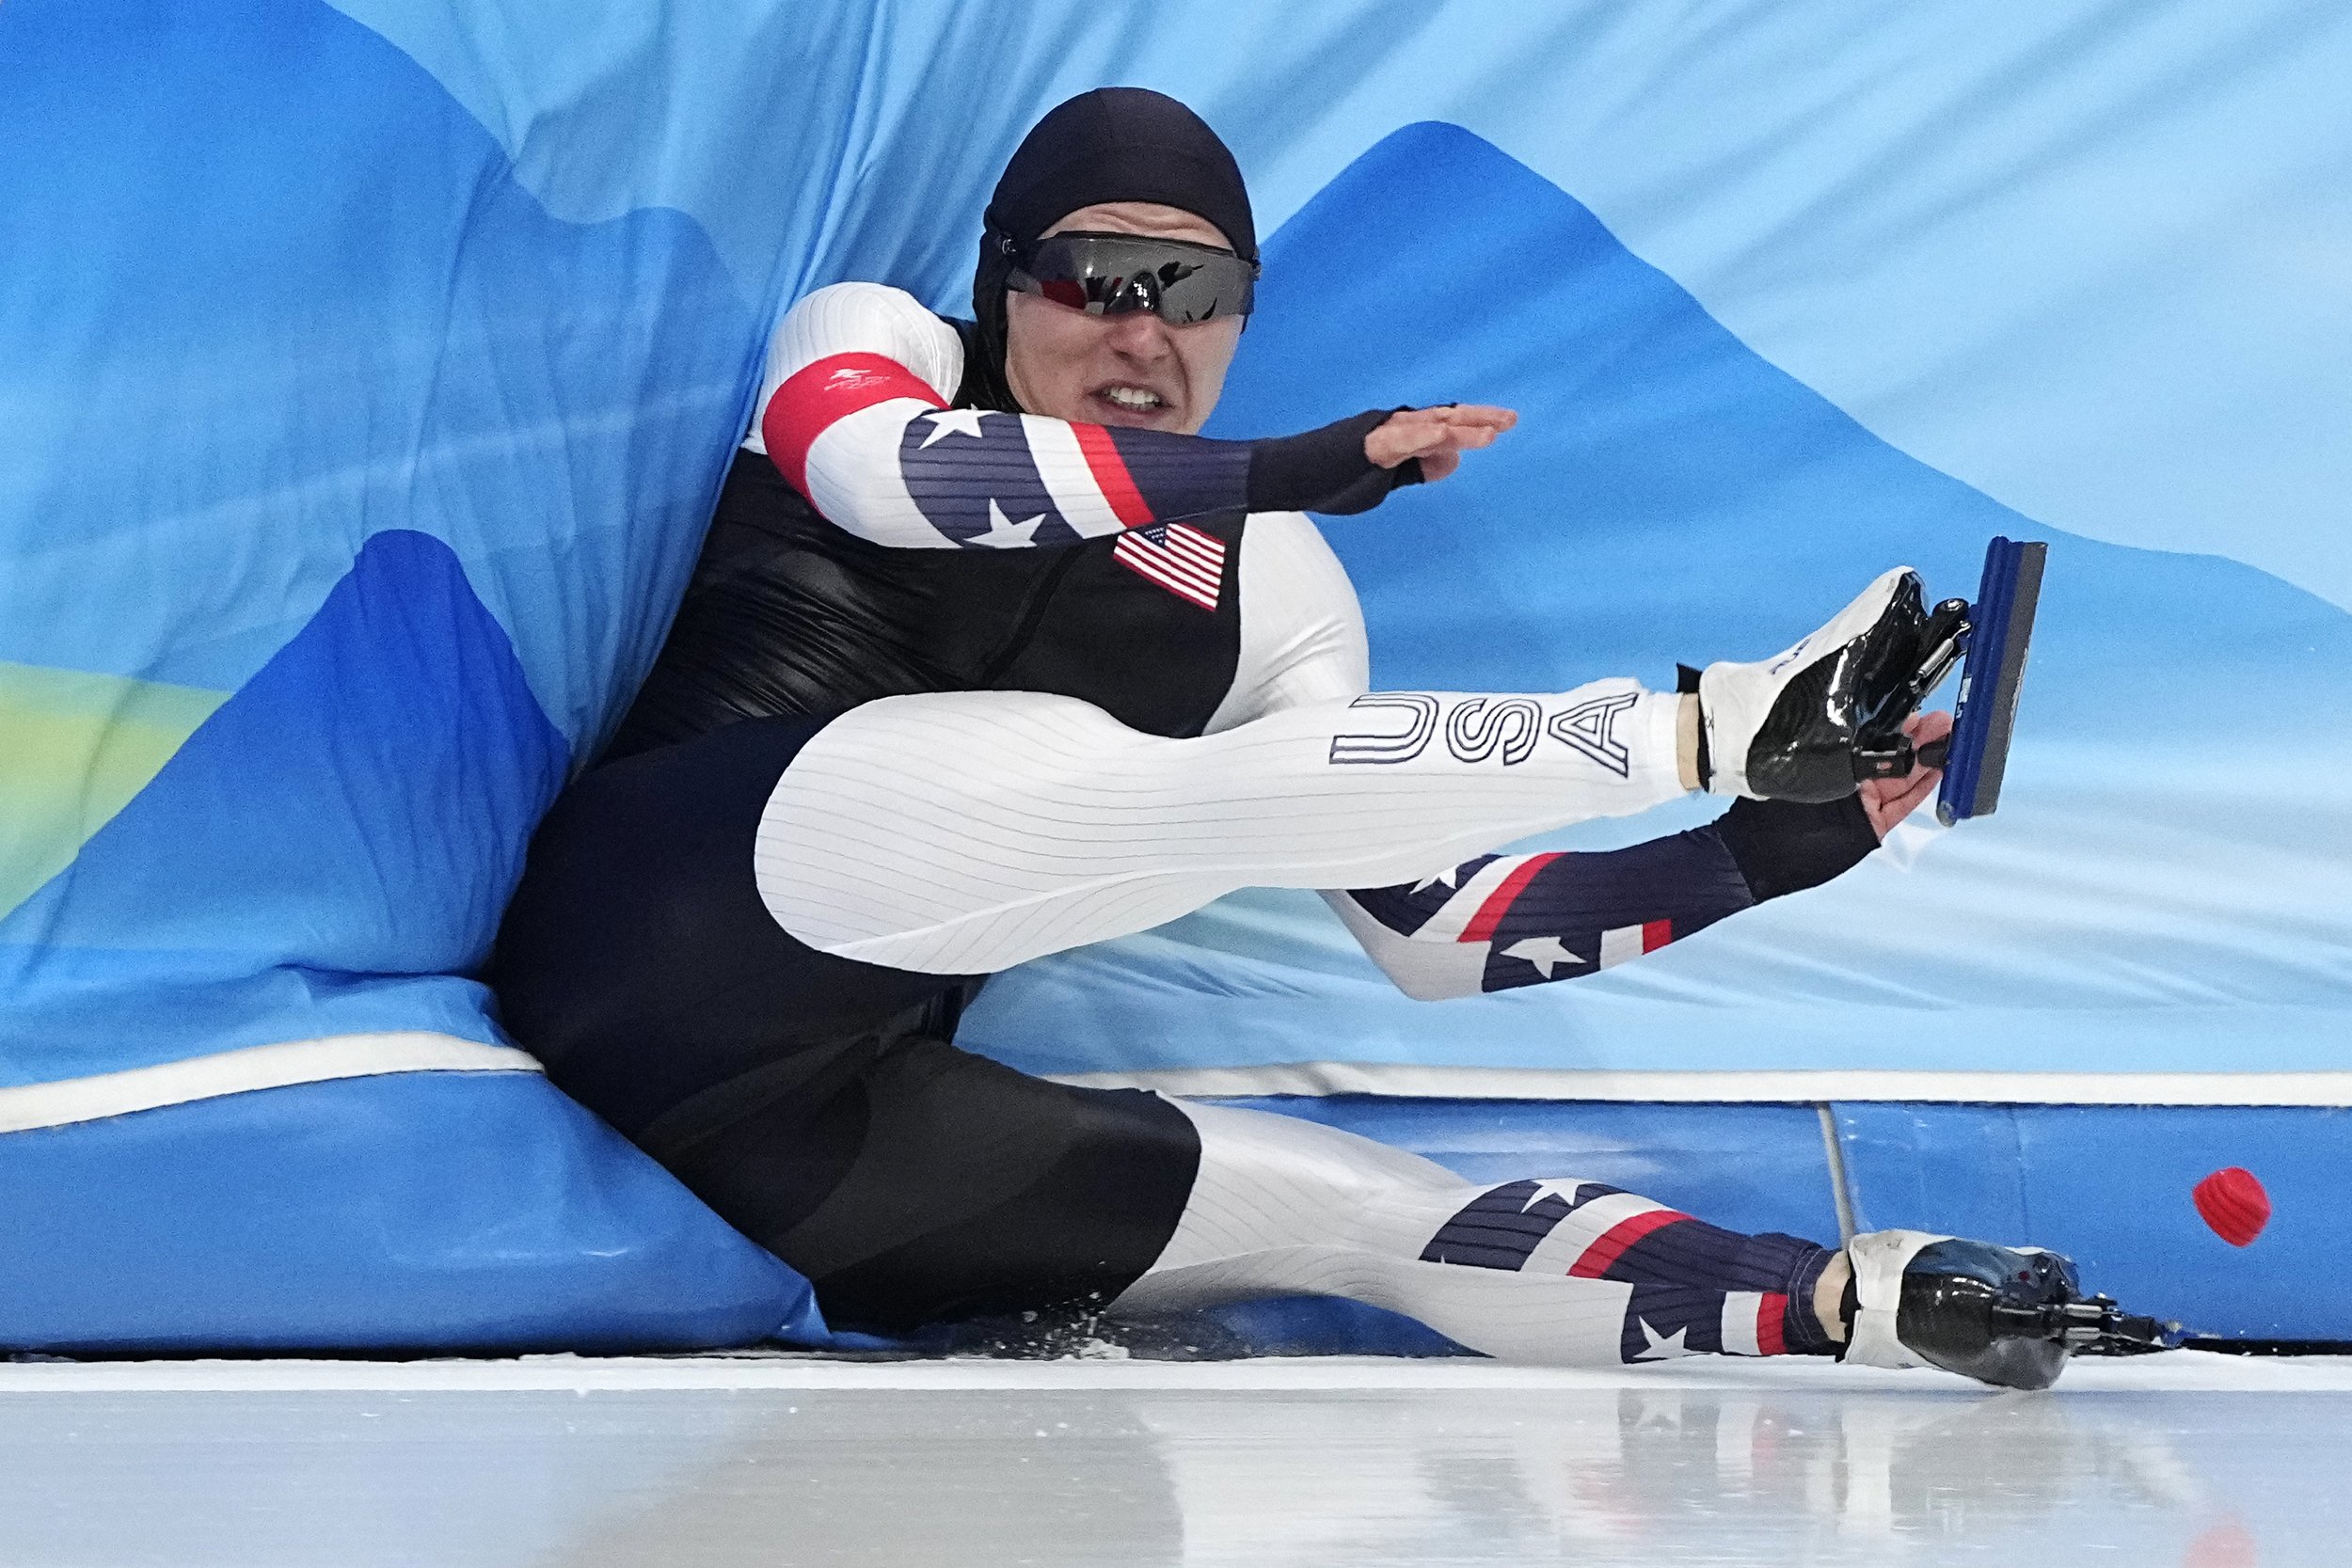  Austin Kleba of the United States falls during his heat in the men's speedskating 500-meter race at the 2022 Winter Olympics, Saturday, Feb. 12, 2022, in Beijing. (AP Photo/Ashley Landis) 